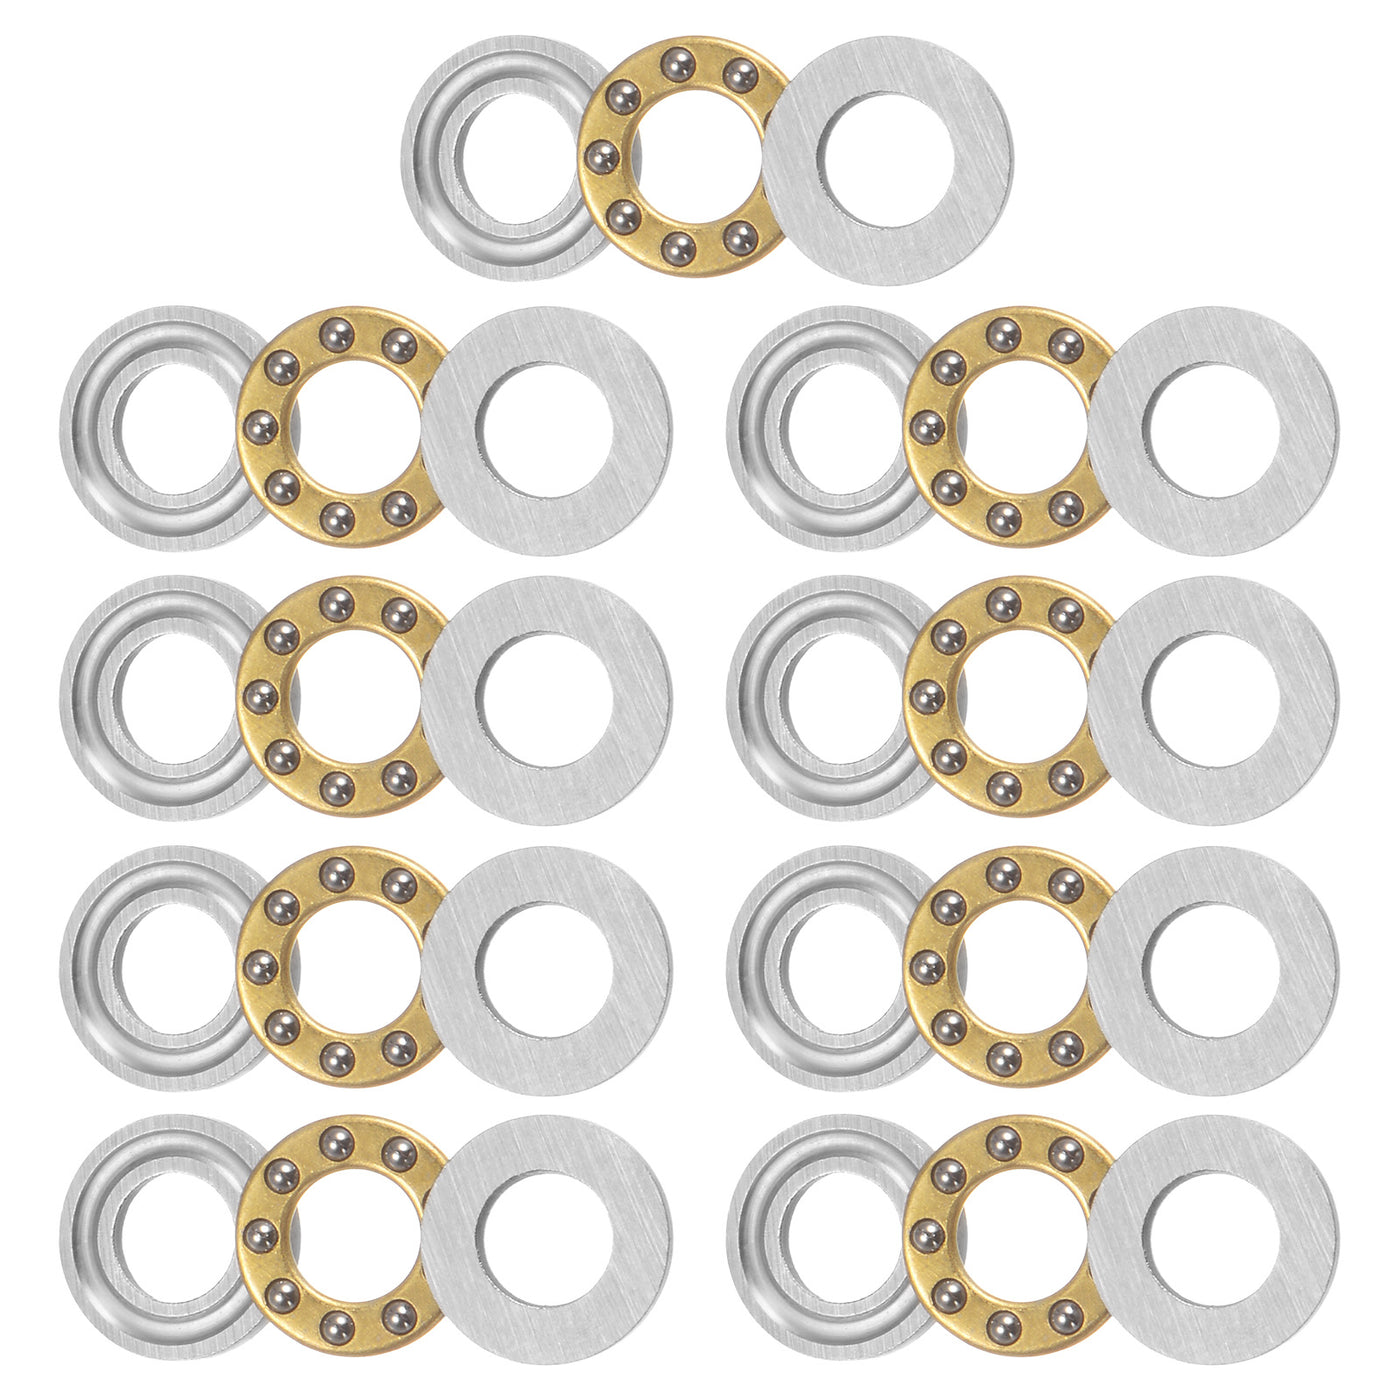 uxcell Uxcell F5-10M Thrust Ball Bearing 5x10x4mm Brass with Washers 9pcs